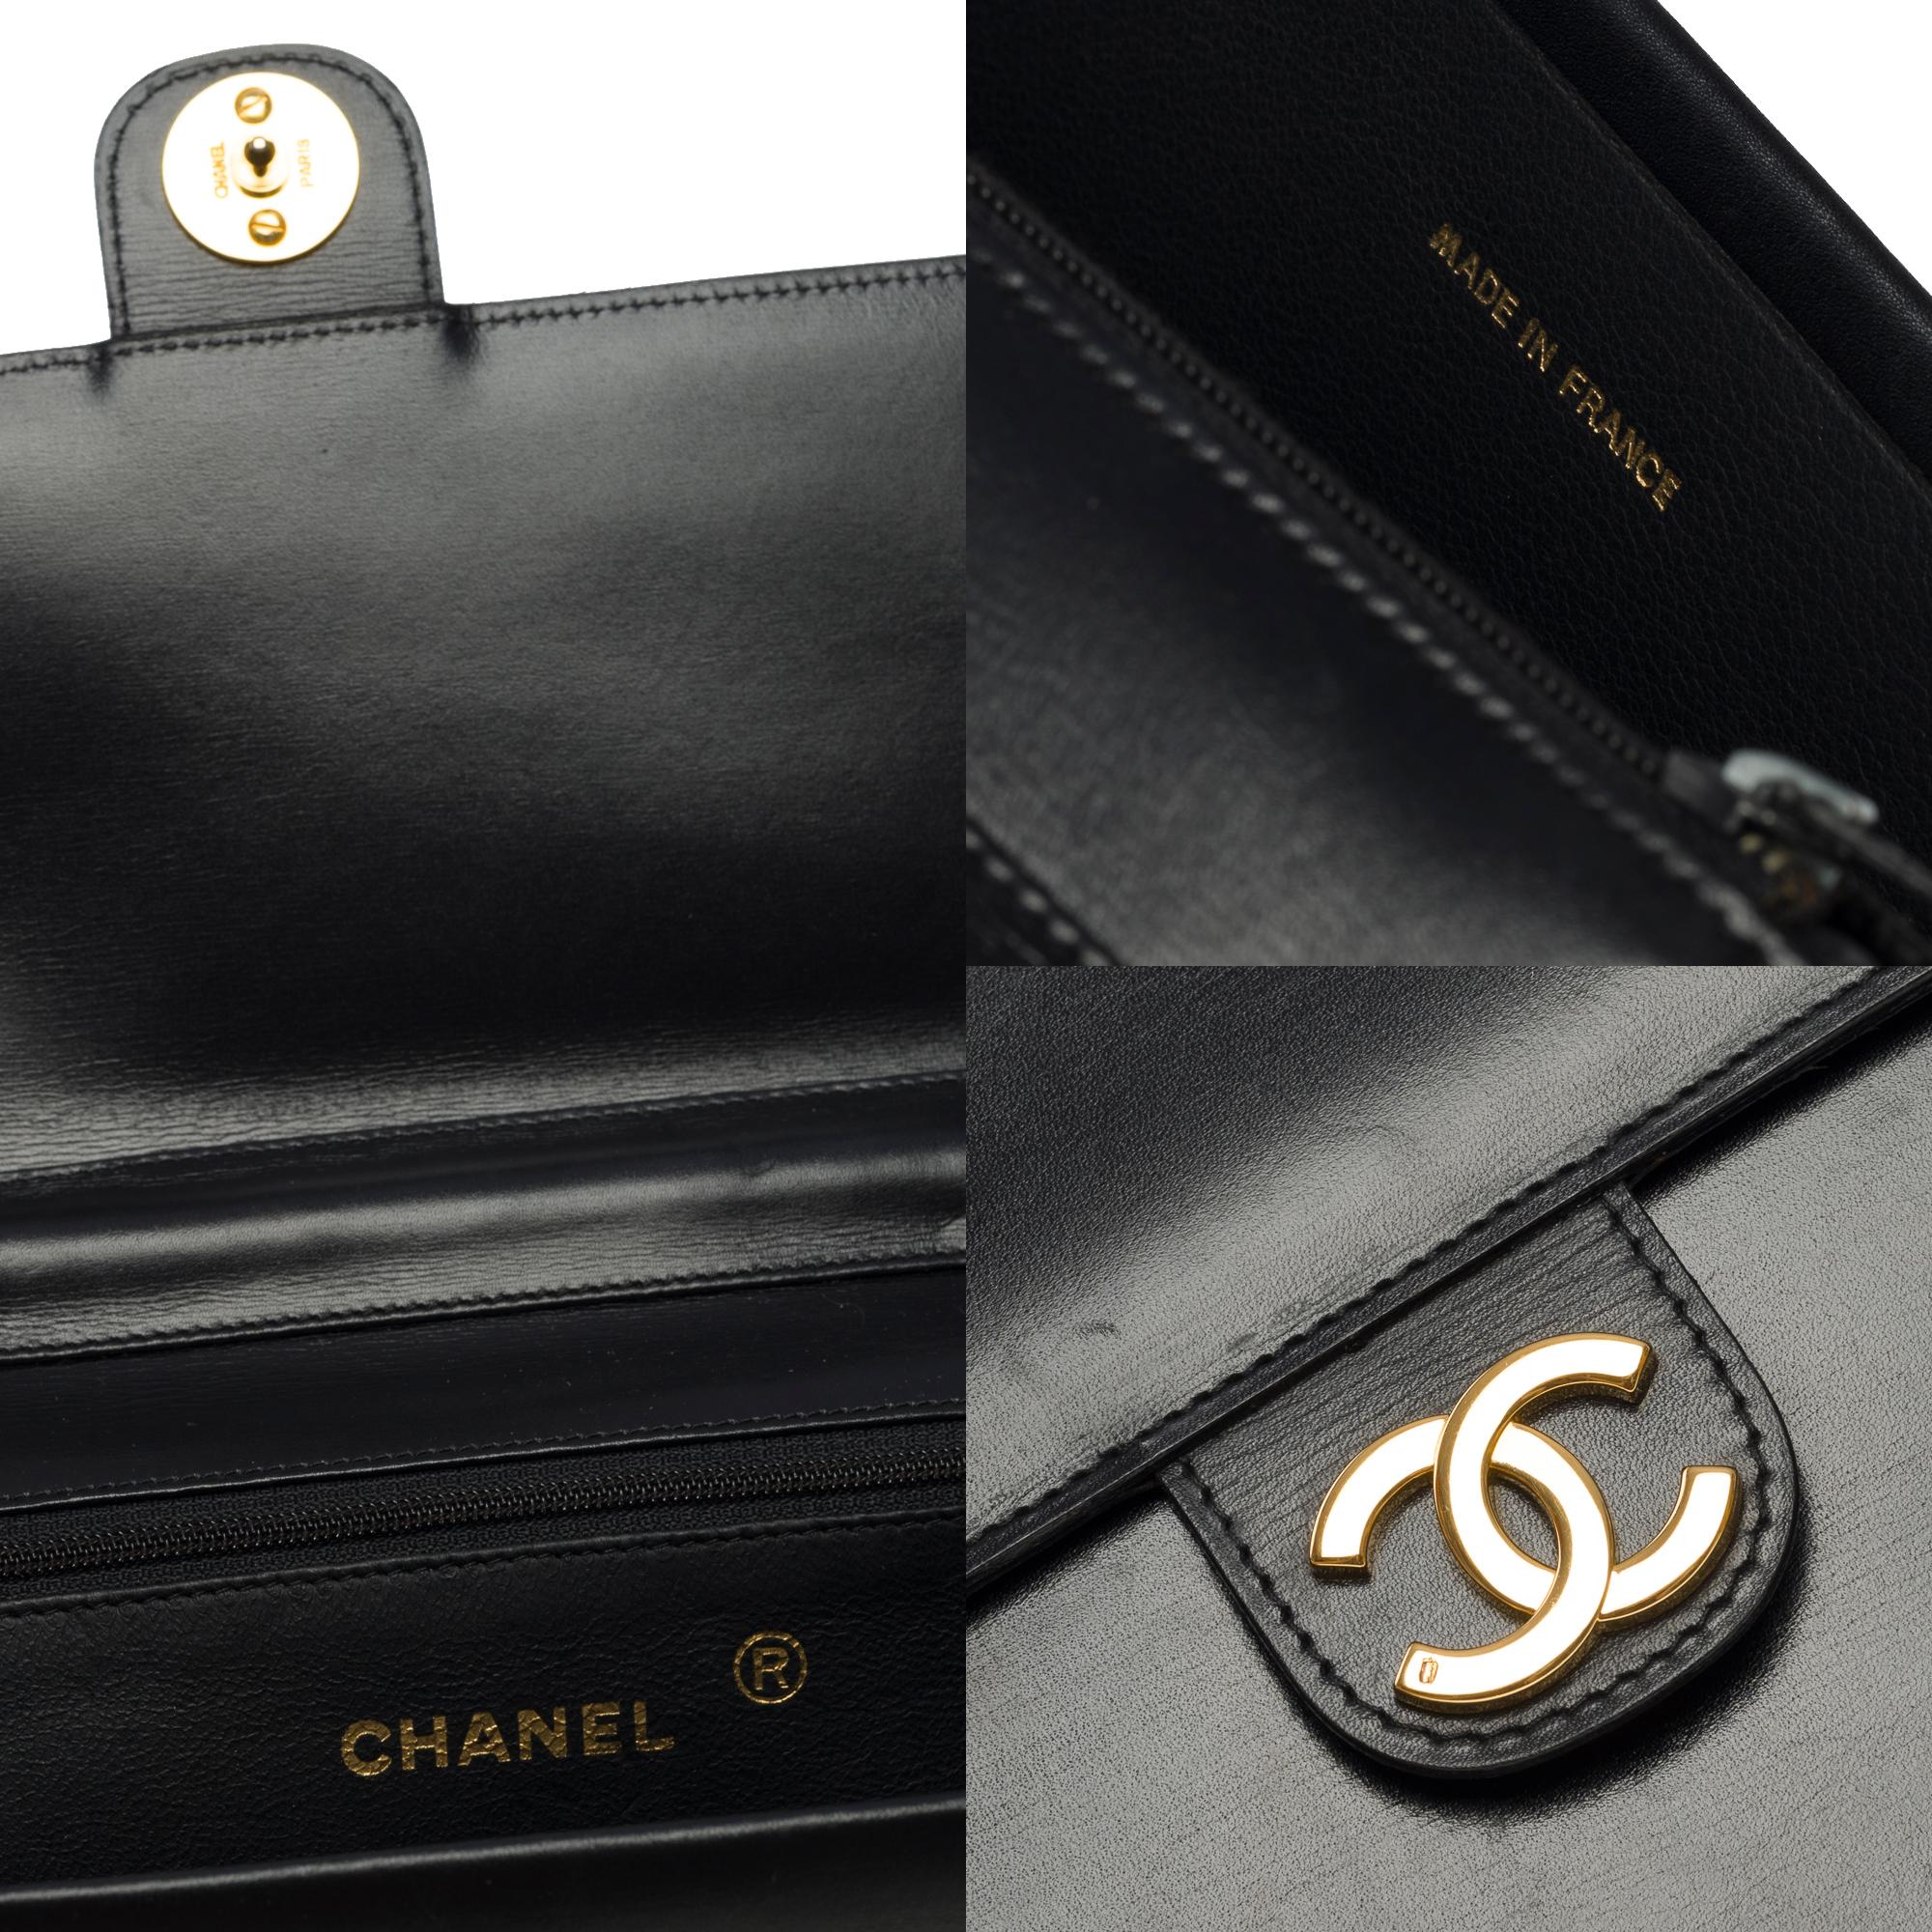 Gorgeous Chanel Classic shoulder flap bag in black box calfskin leather, GHW 11